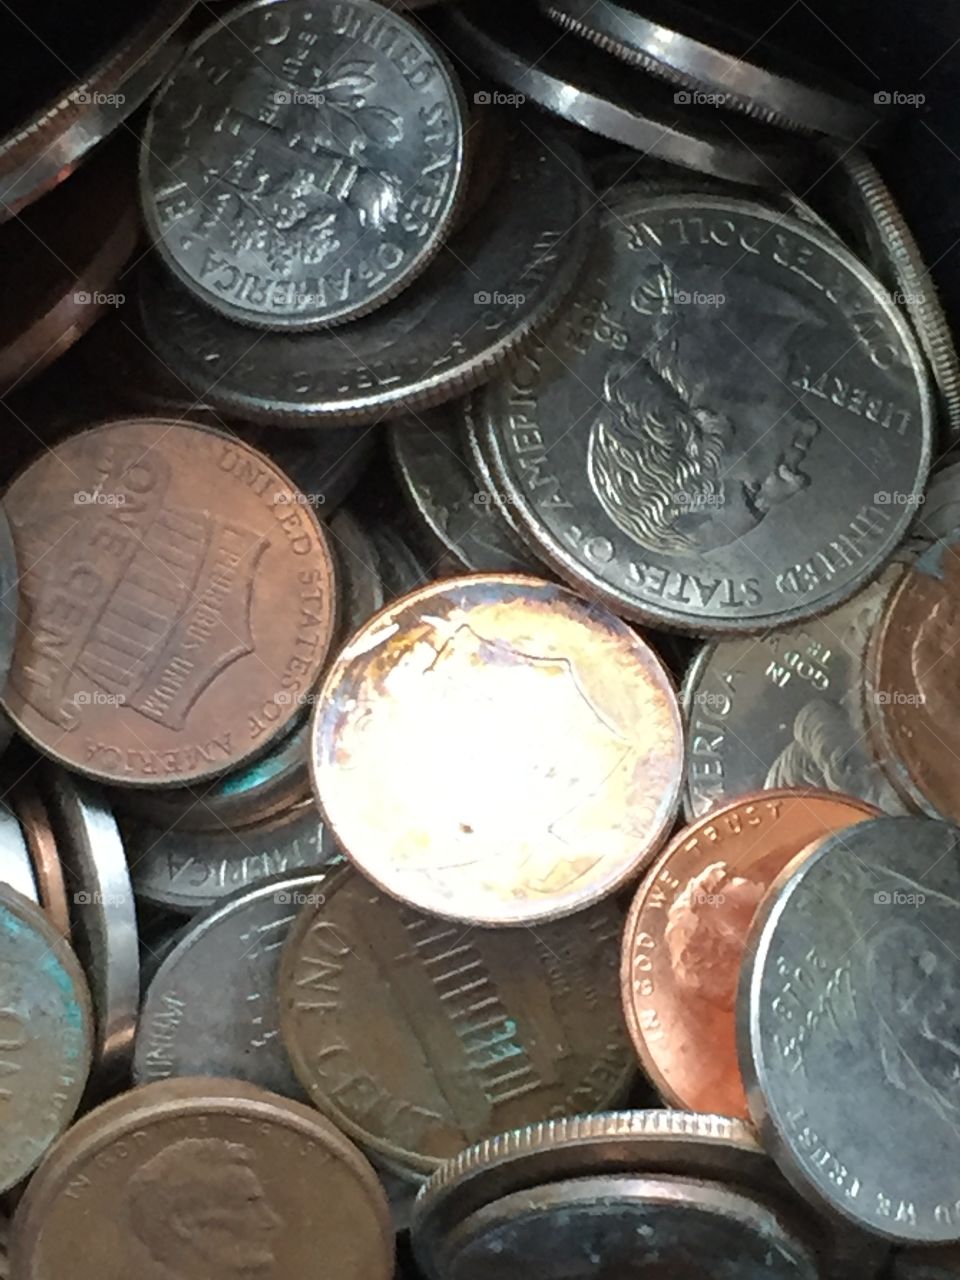 It's just all the coins in my cup holder.